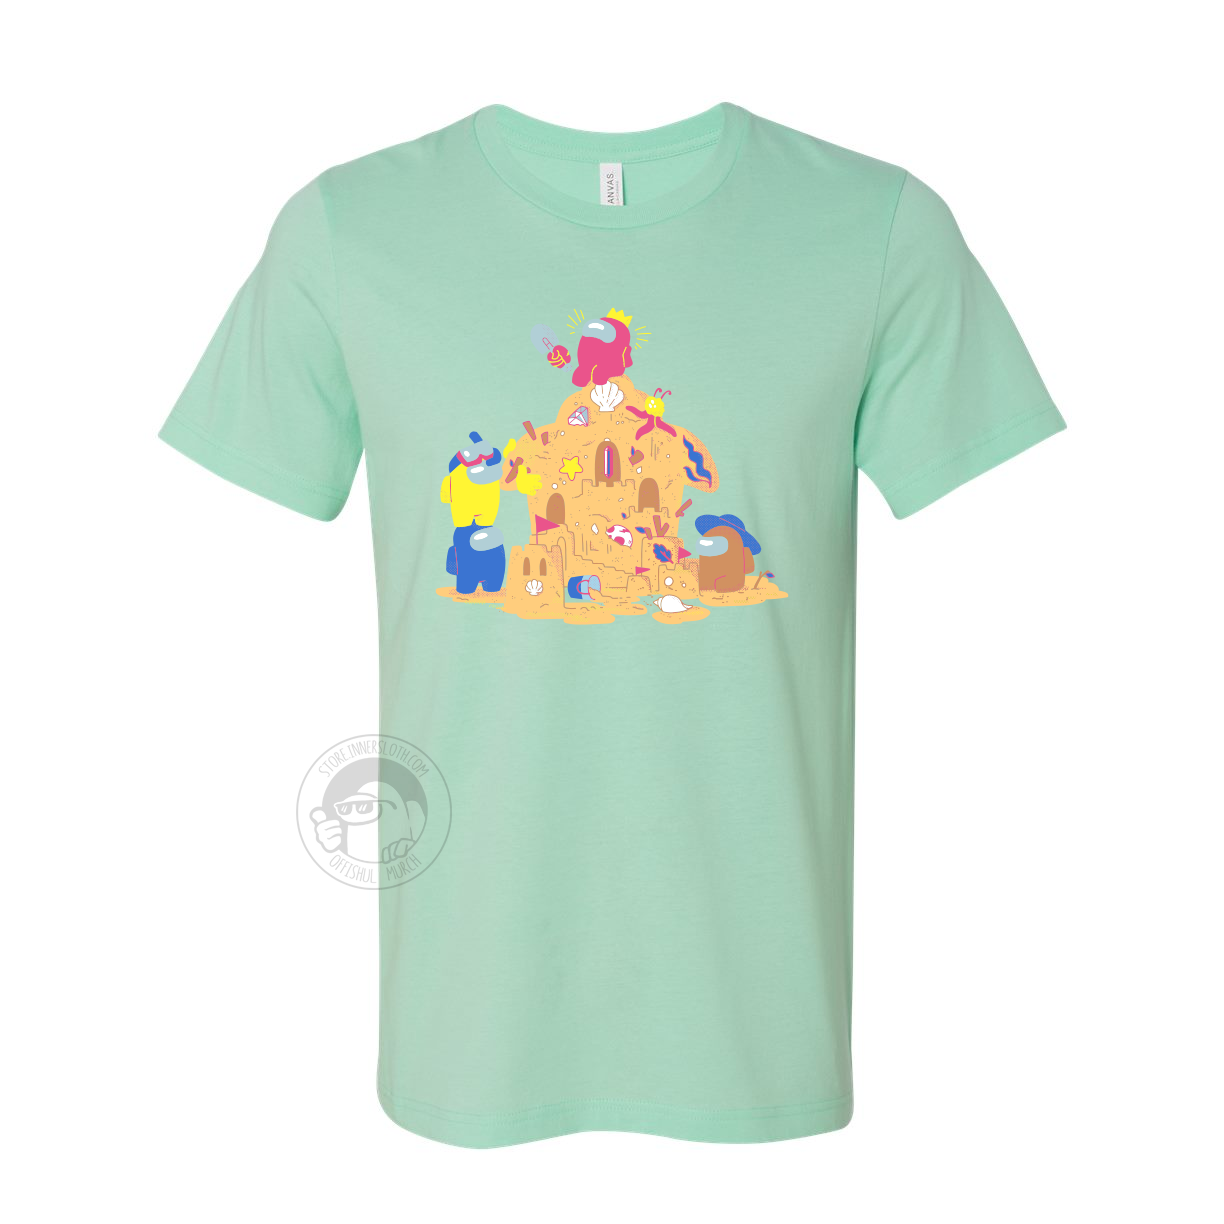  A product photo of the Among Us: Sandcastle Tee in Mint. The t-shirt is pistachio green and shows four crewmates building a sandcastle, which vaguely resembles the Airship. A pink crewmate wearing a crown hat sits at the top of the castle. 